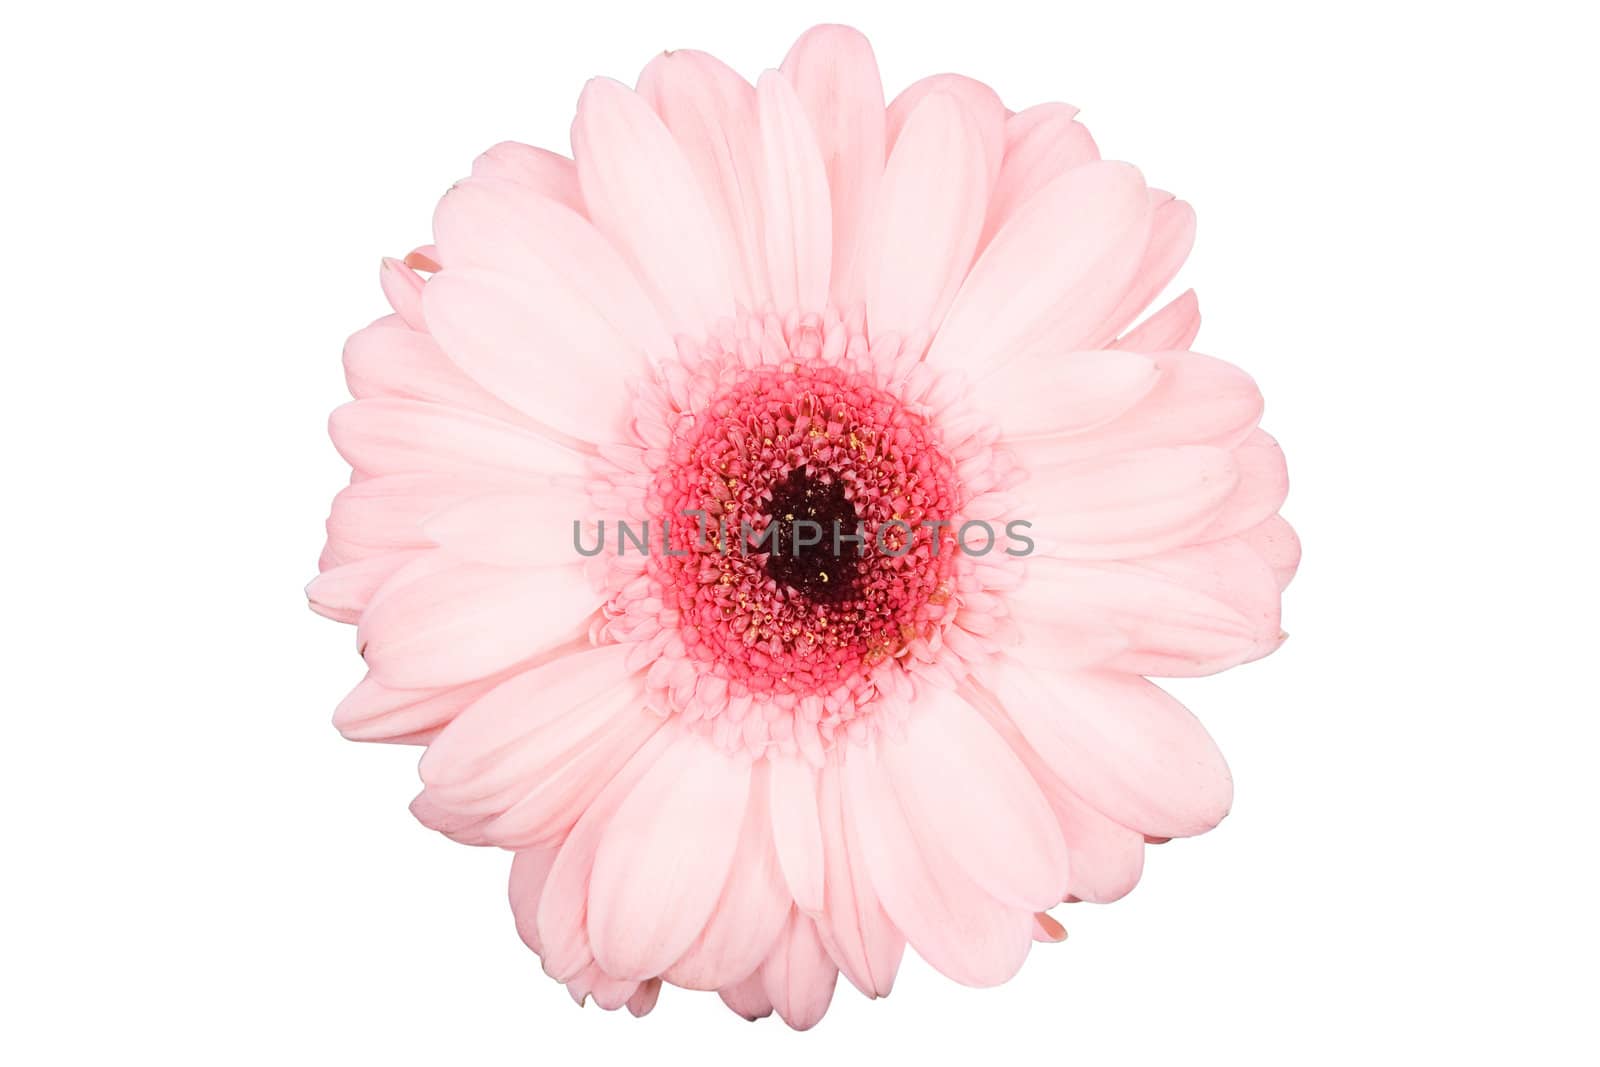 Gerbera daisy isolated on a white background